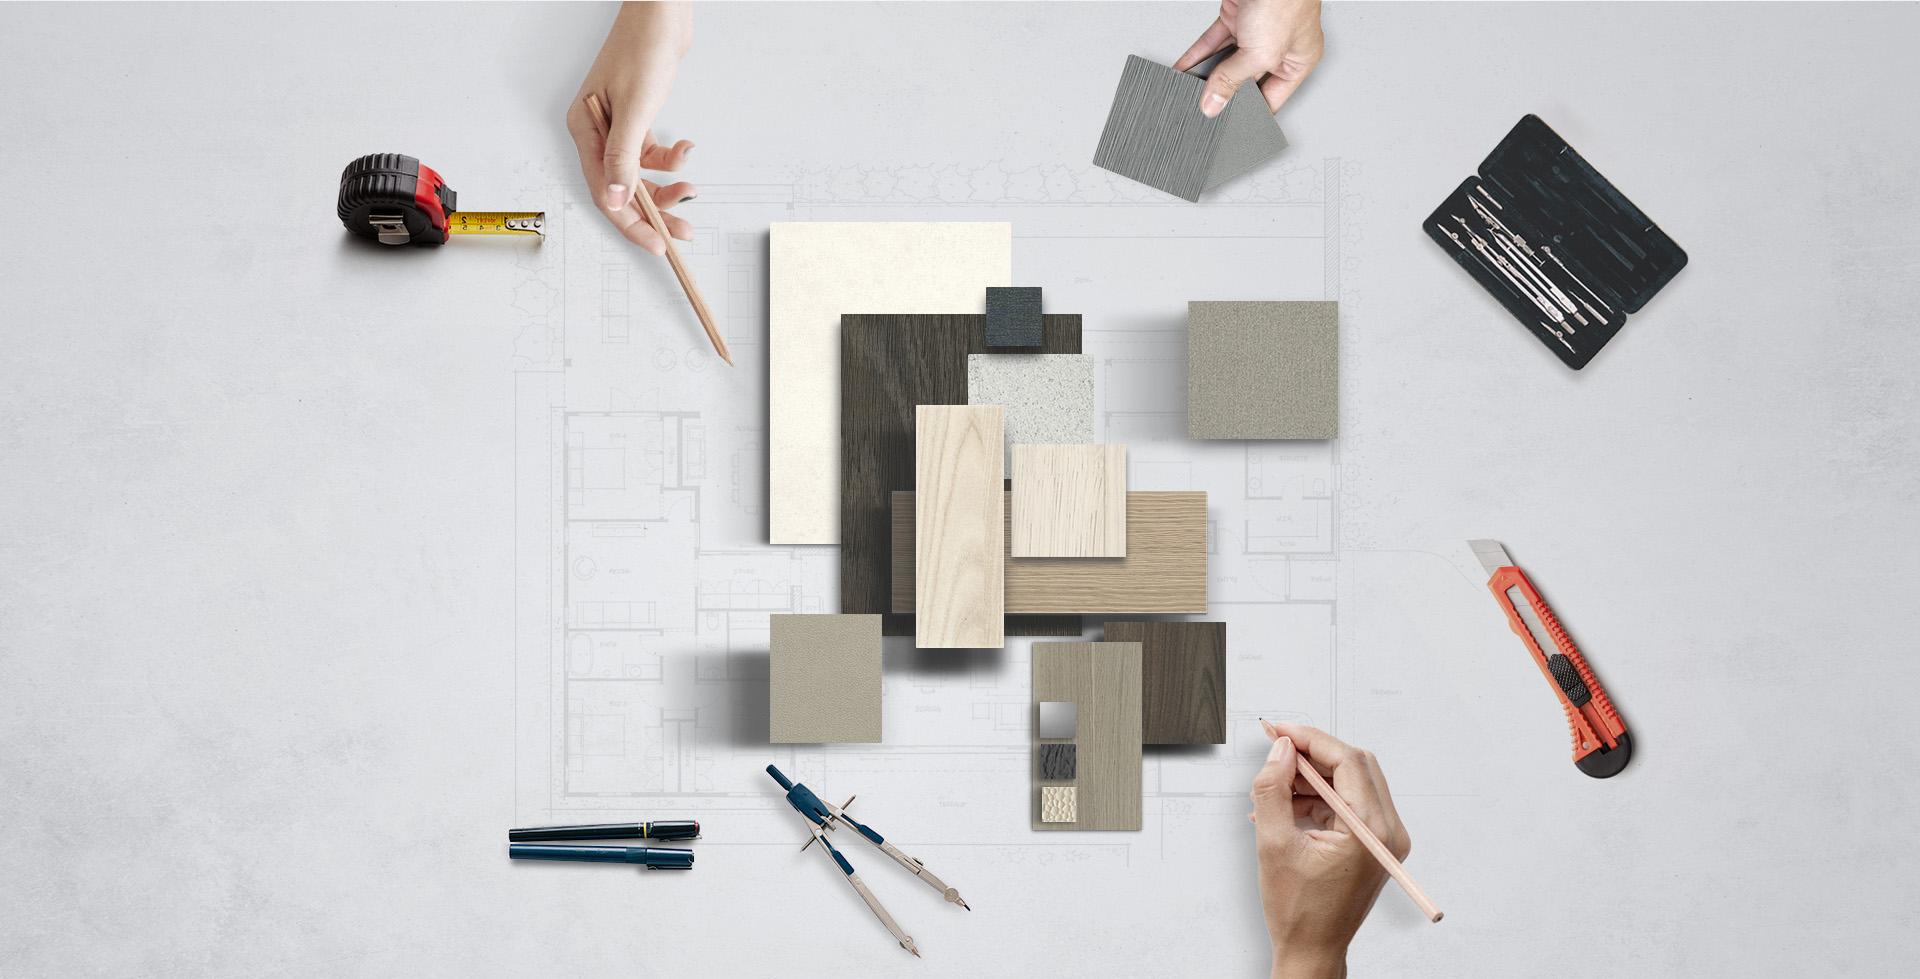 Innovative
Surfaces
for Visionary 
Designers